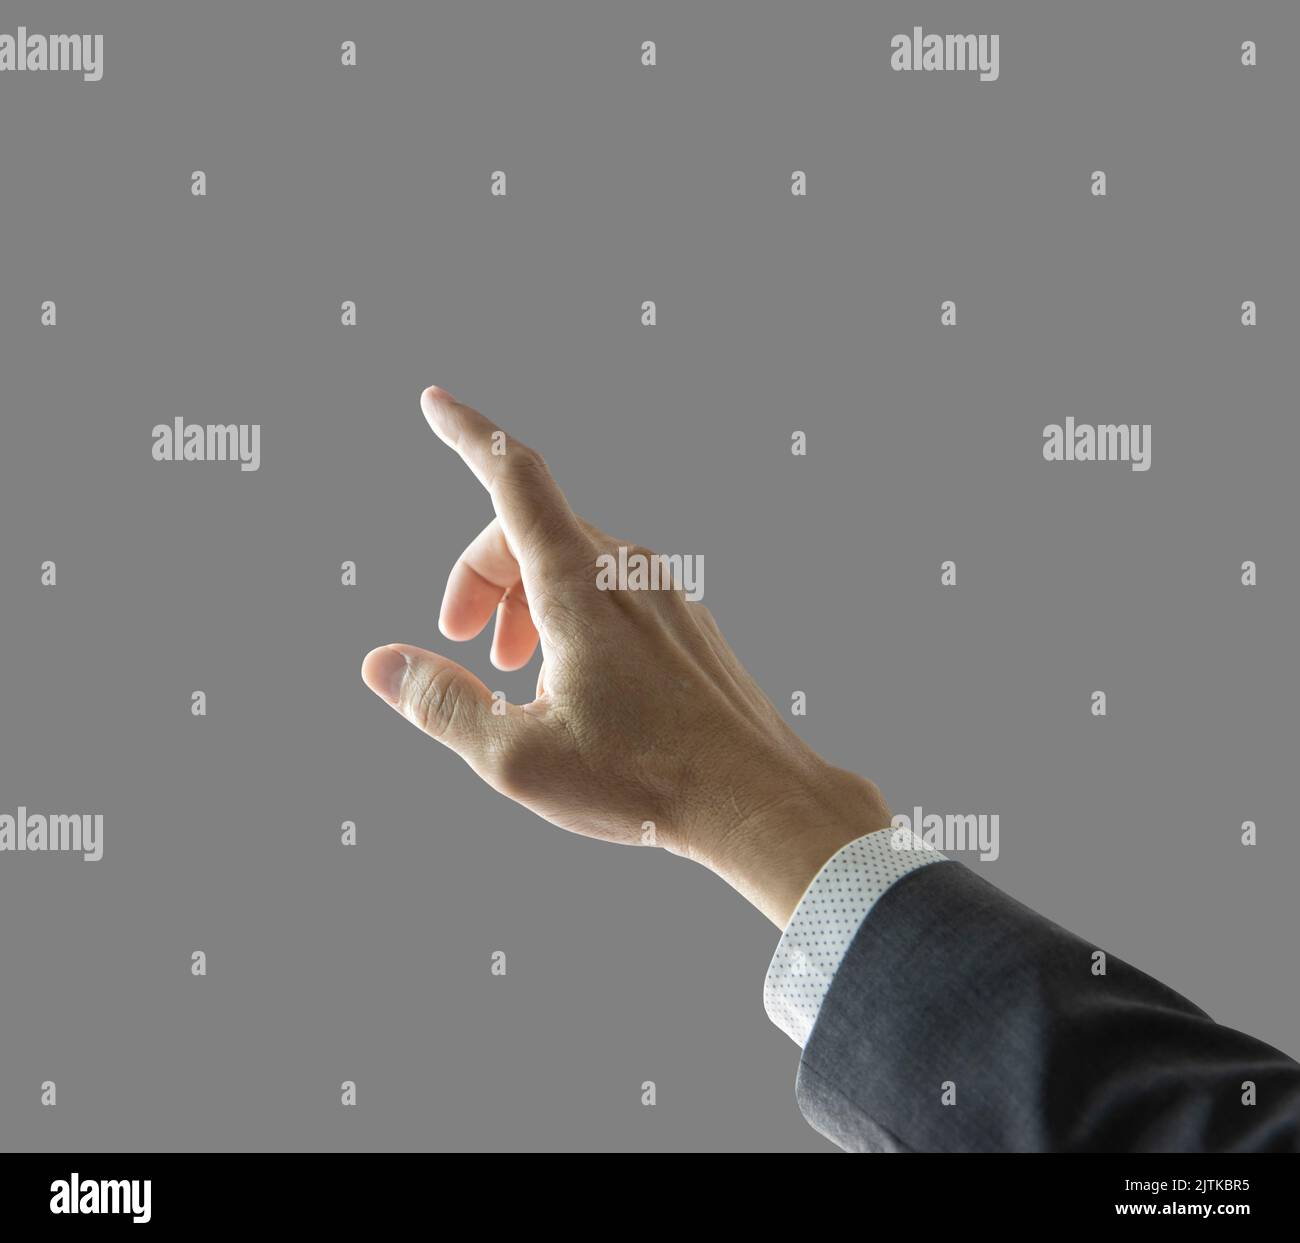 Right hand and forearm of a businessman with gray suit jacket sleeve with white shirt, pointing forward up showing touching something gesture. Isolate Stock Photo